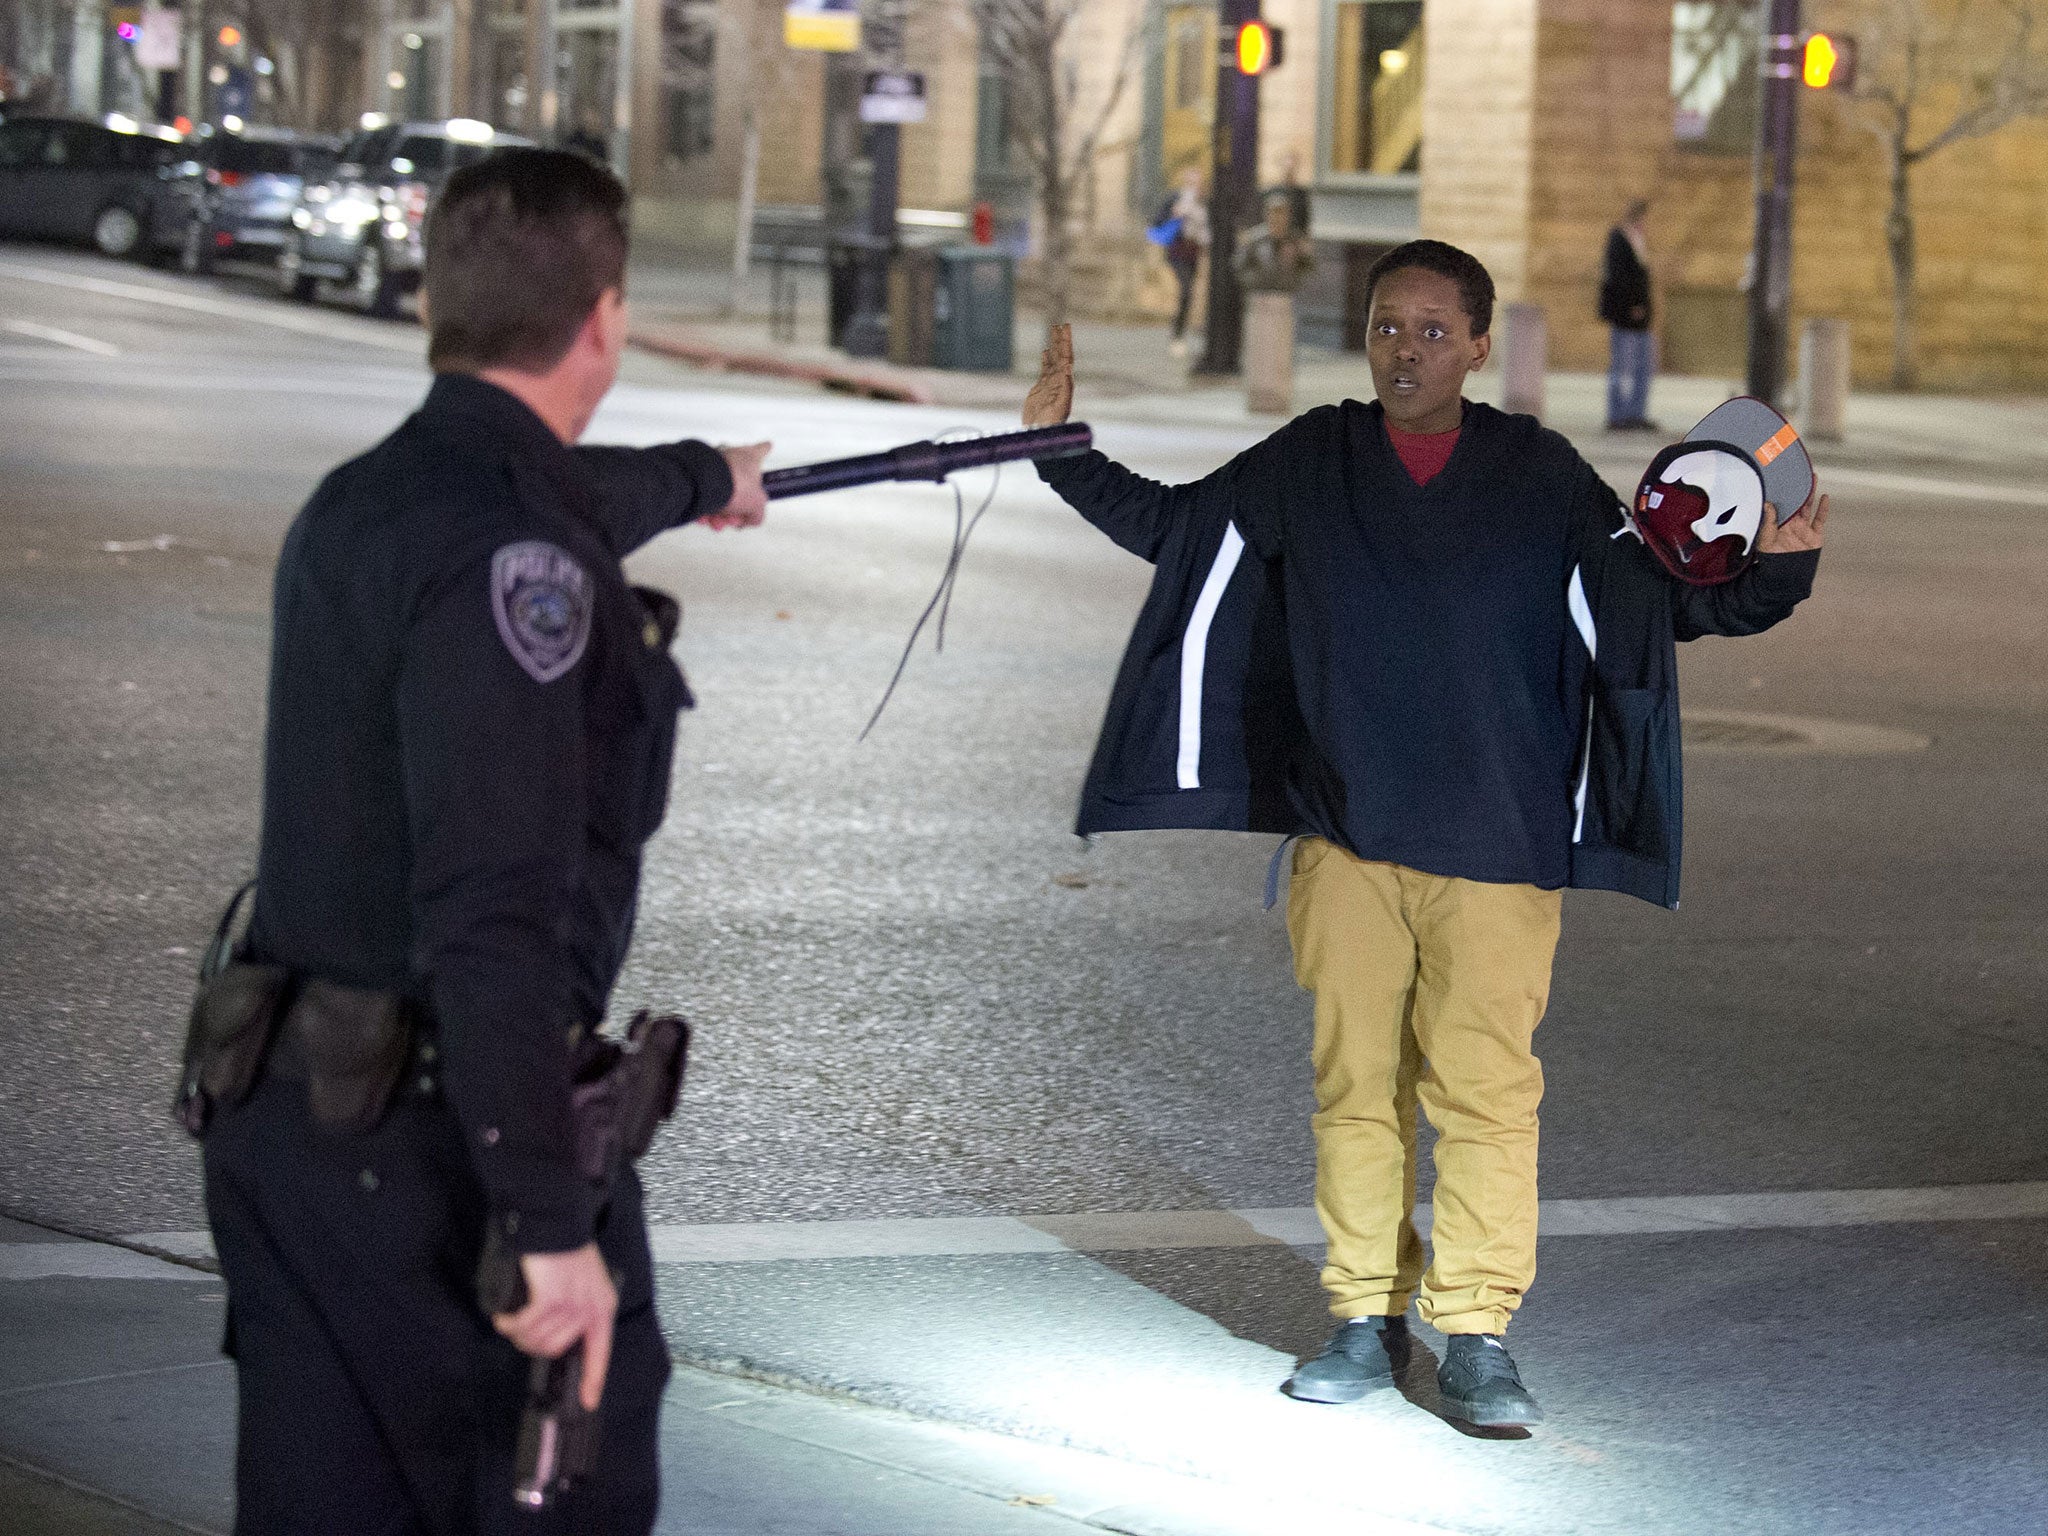 Selam Mohammad, a friend of the shot boy, was stopped by police as he walked away from the scene of the shooting at 200 South Rio Grande Street in Salt Lake City, 27 February 2016.